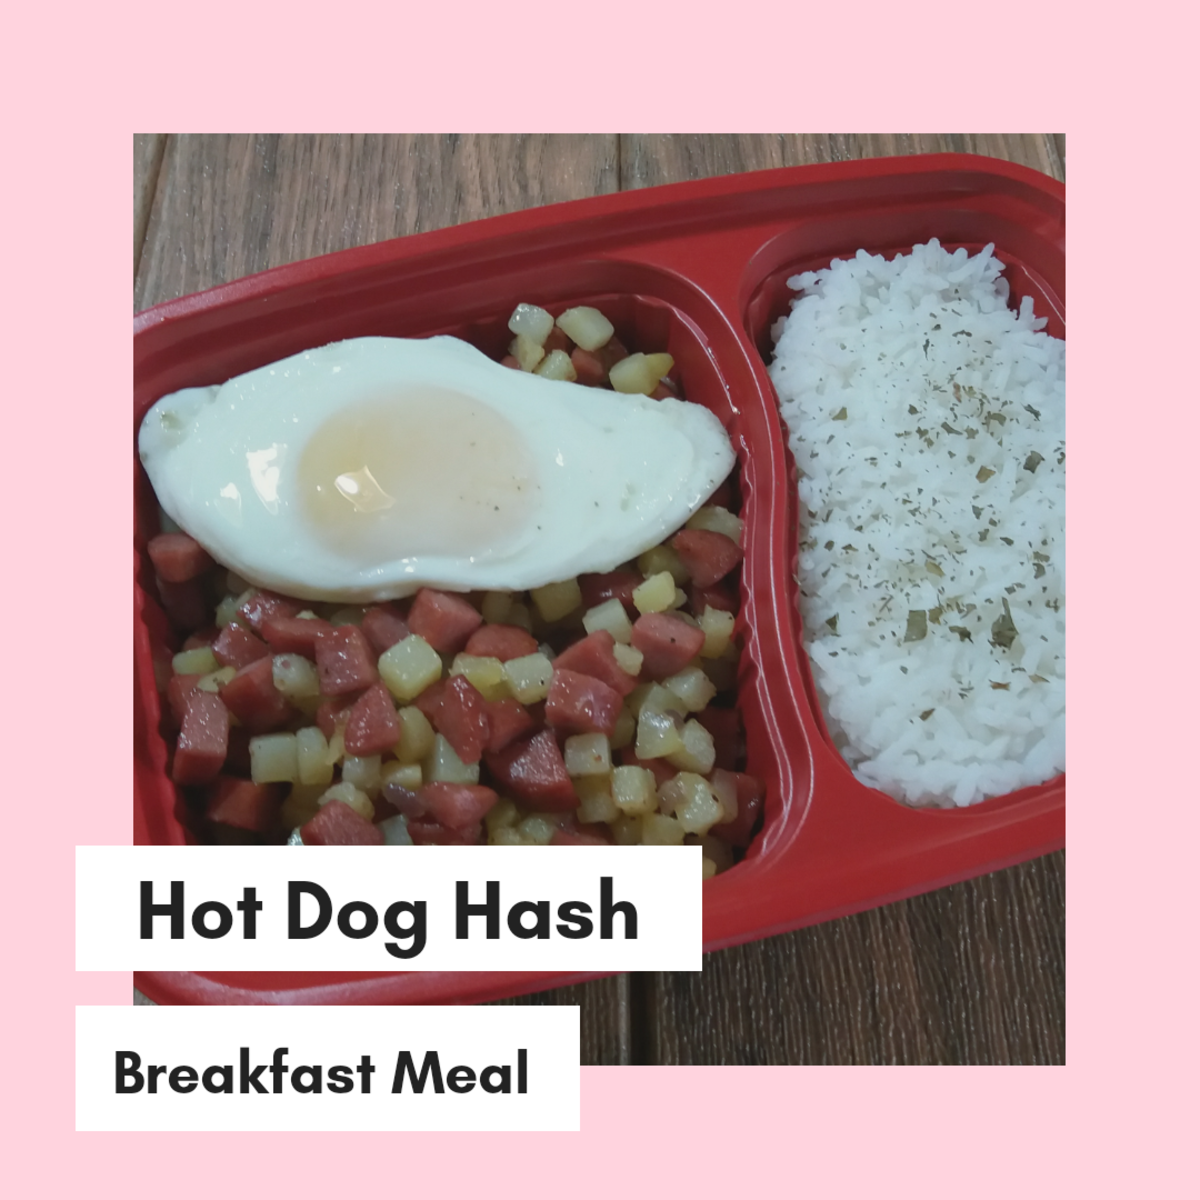 How about some hot dog hash for breakfast?